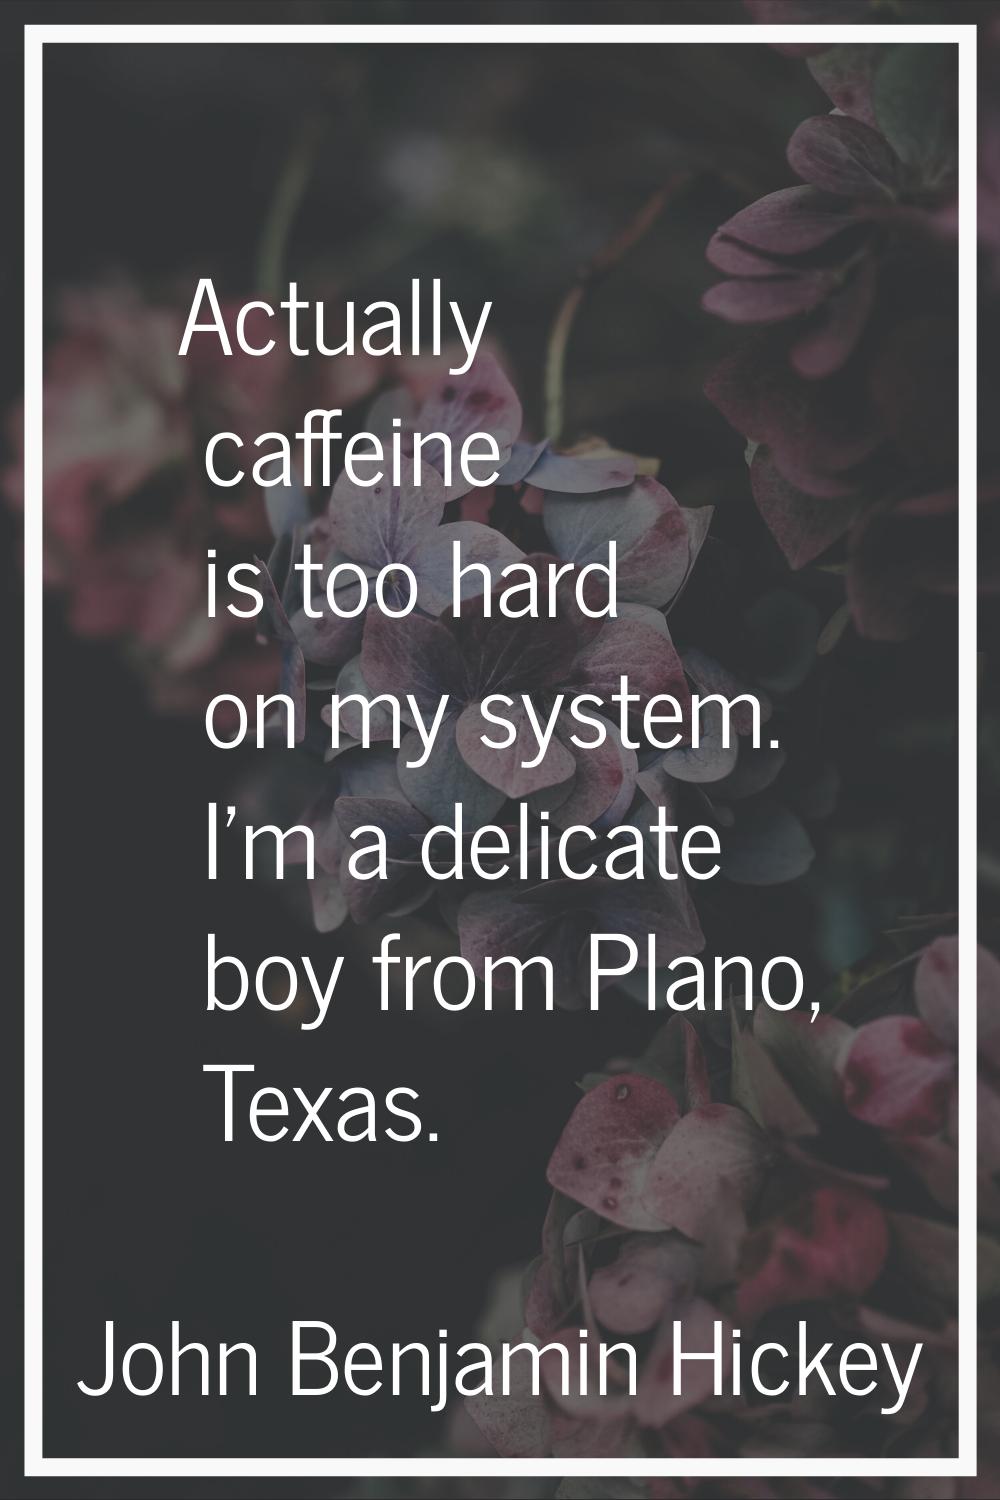 Actually caffeine is too hard on my system. I'm a delicate boy from Plano, Texas.